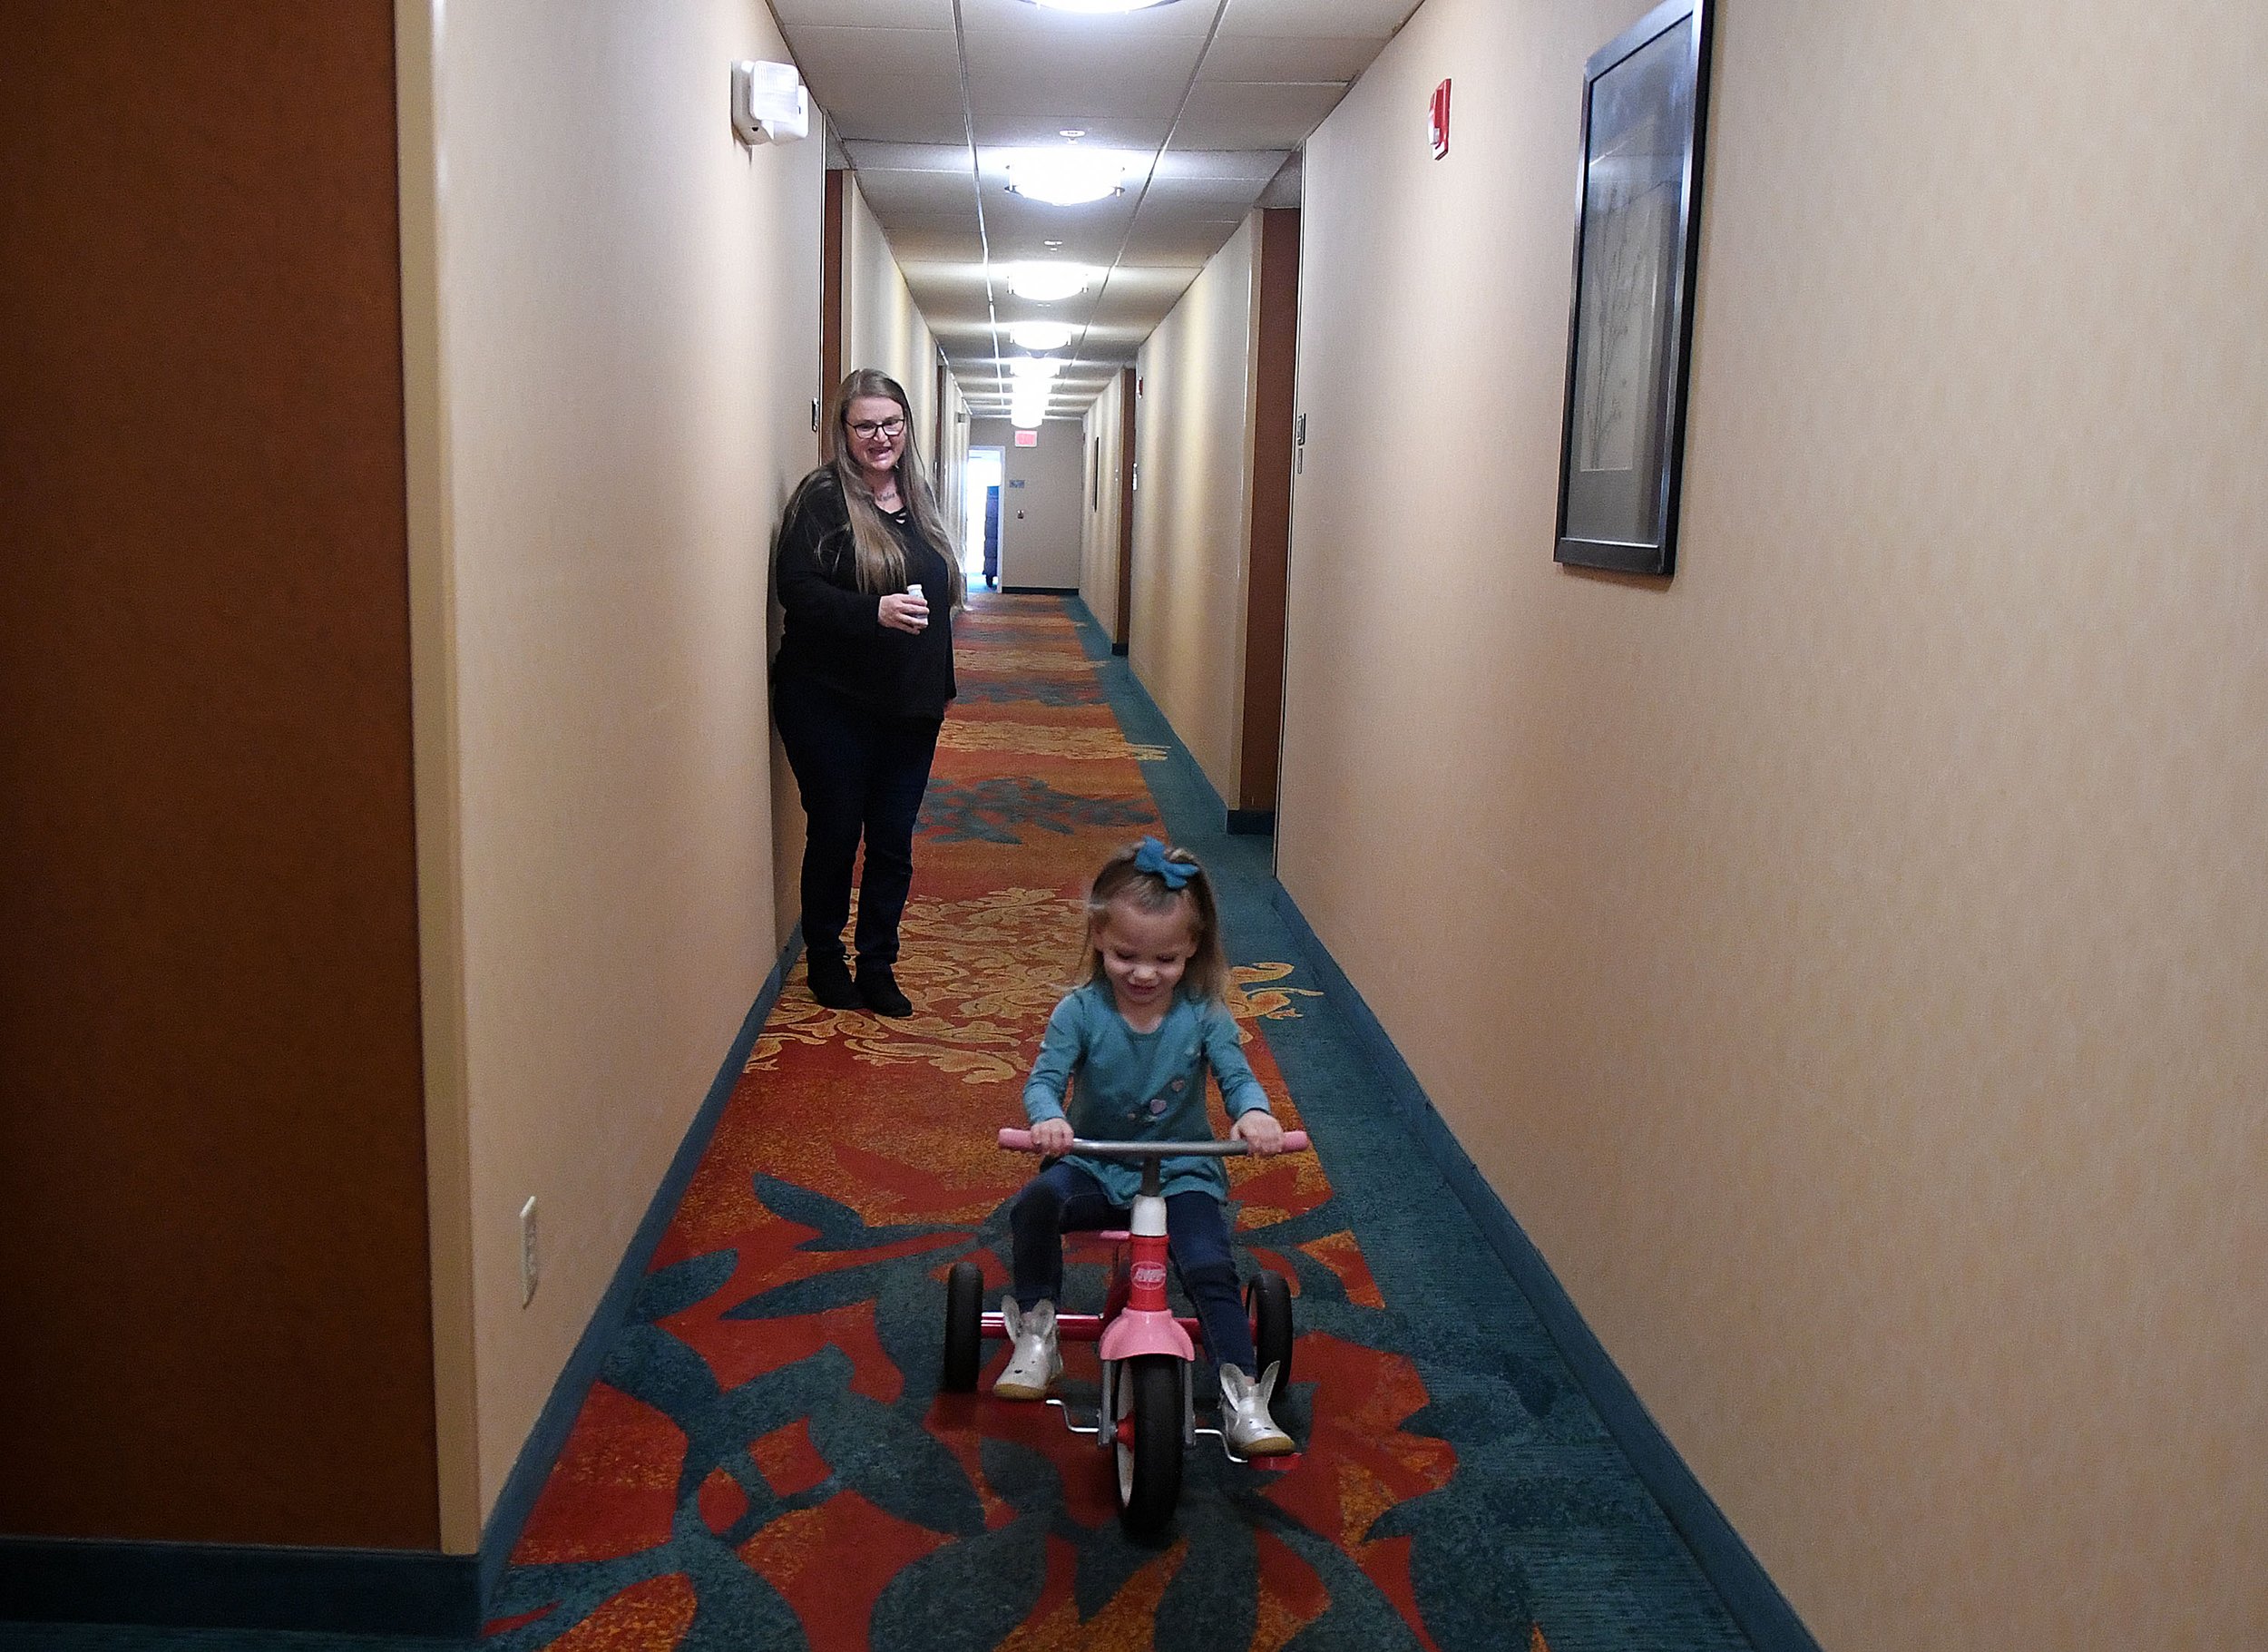  Azrielle Levy, 2, rides her trike down as her mother Valarie watches the hallway of the Residence Inn Mystic on Wednesday, November 2, 2022. With no playground they can walk to Valarie struggles to keep the active toddler entertained in a hotel room